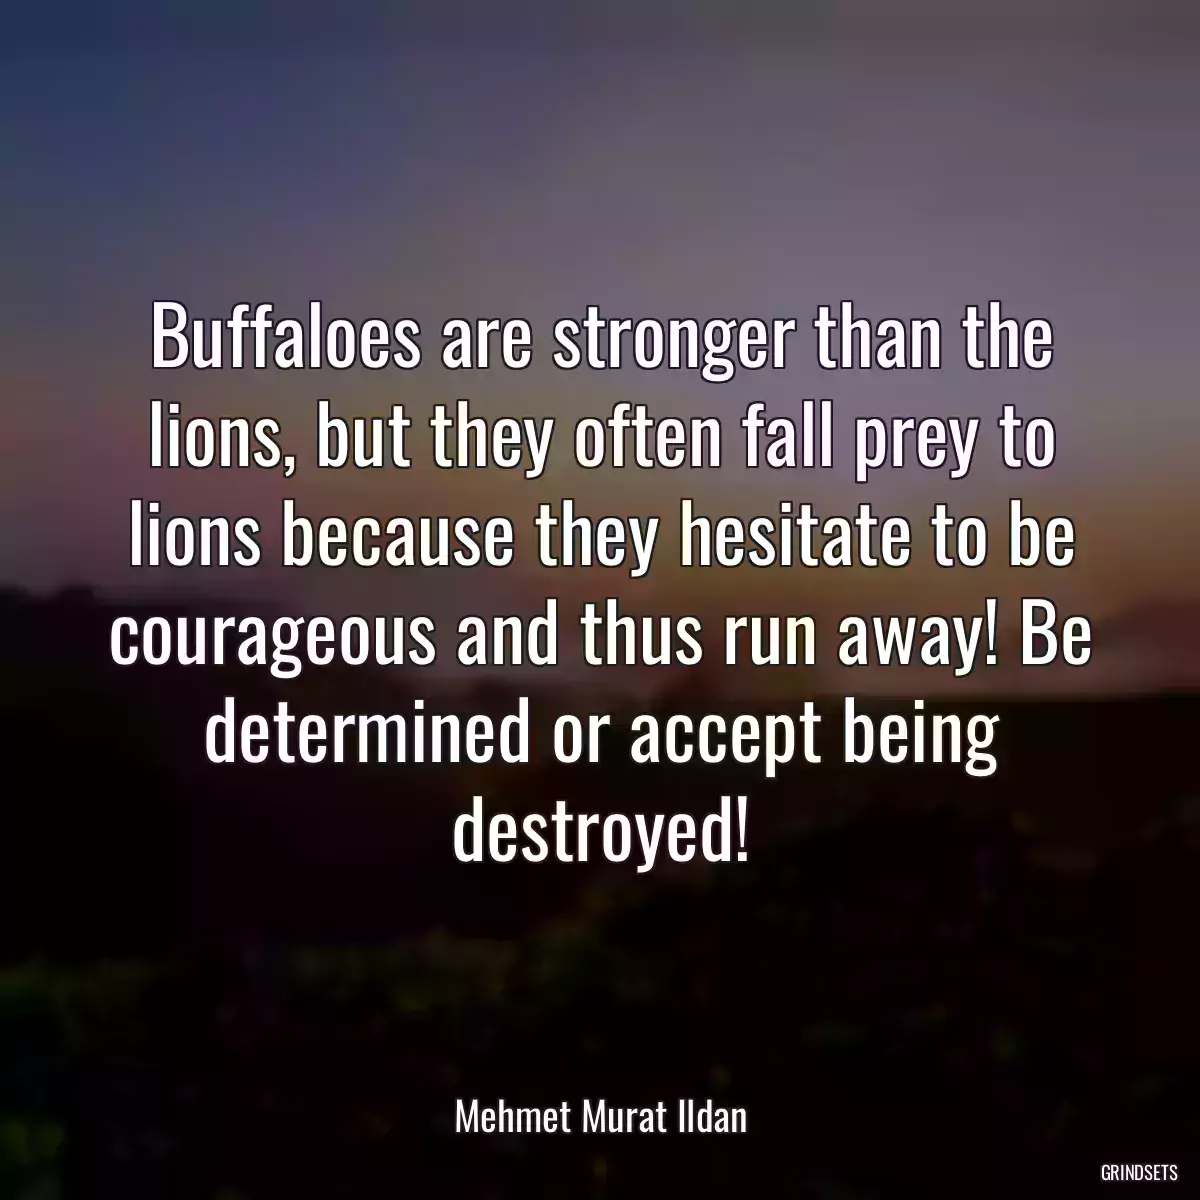 Buffaloes are stronger than the lions, but they often fall prey to lions because they hesitate to be courageous and thus run away! Be determined or accept being destroyed!